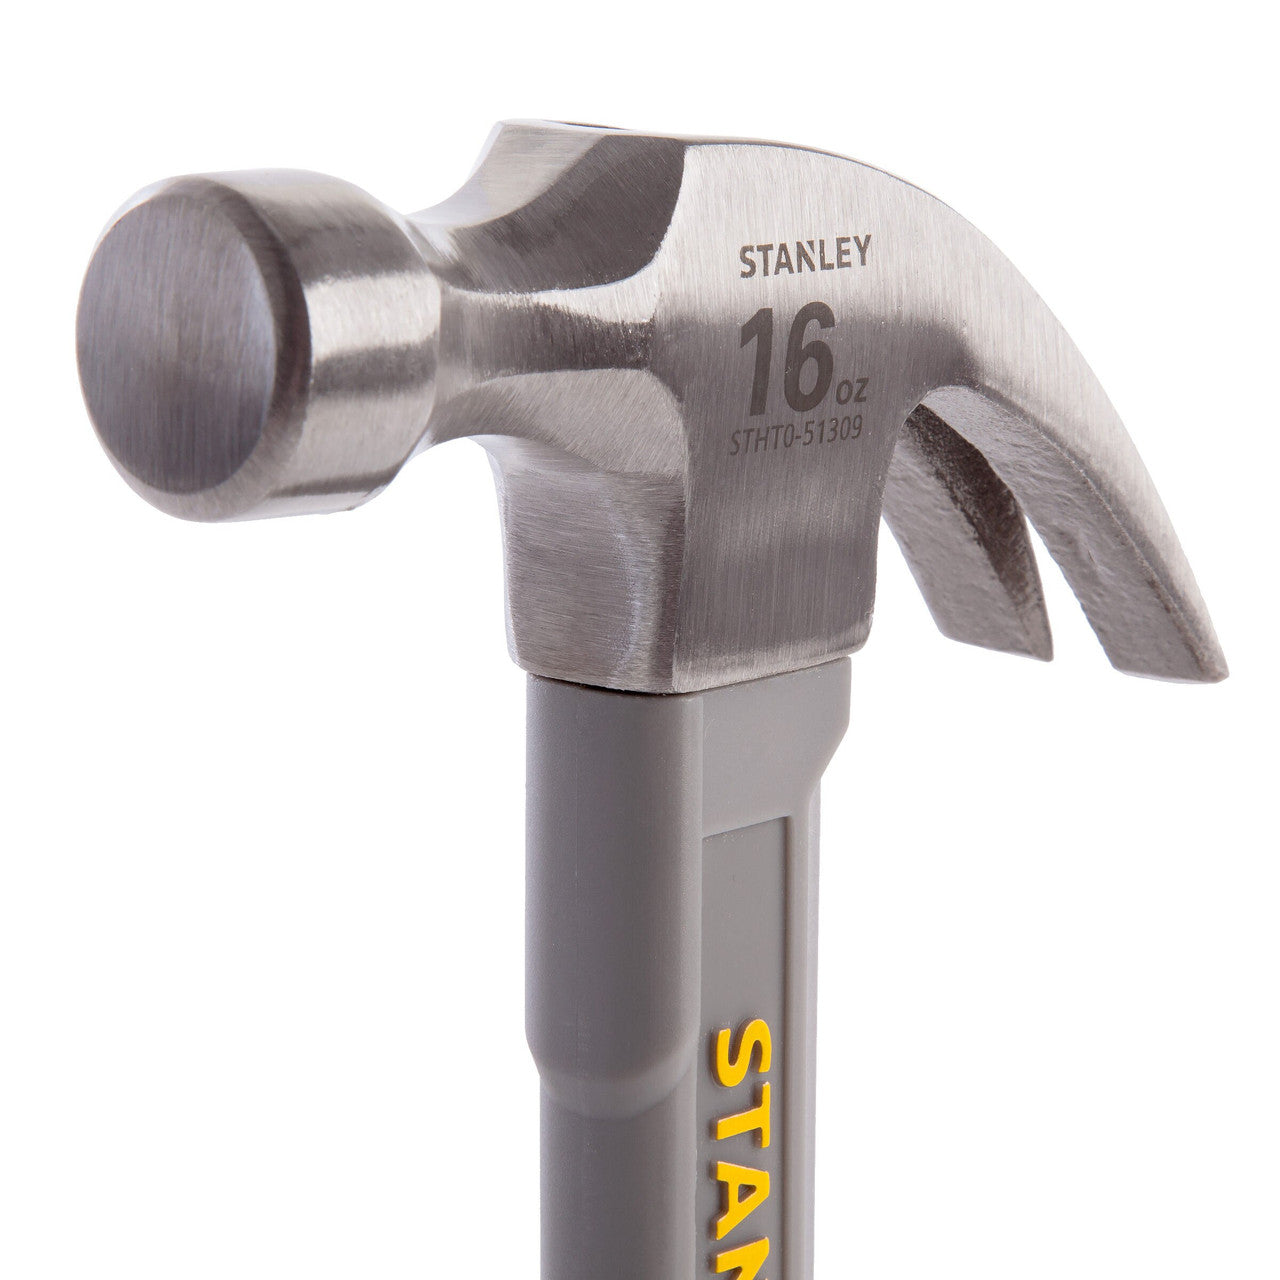 Stanley STHT0-51309 Claw Hammer with Fibreglass Shaft 16oz